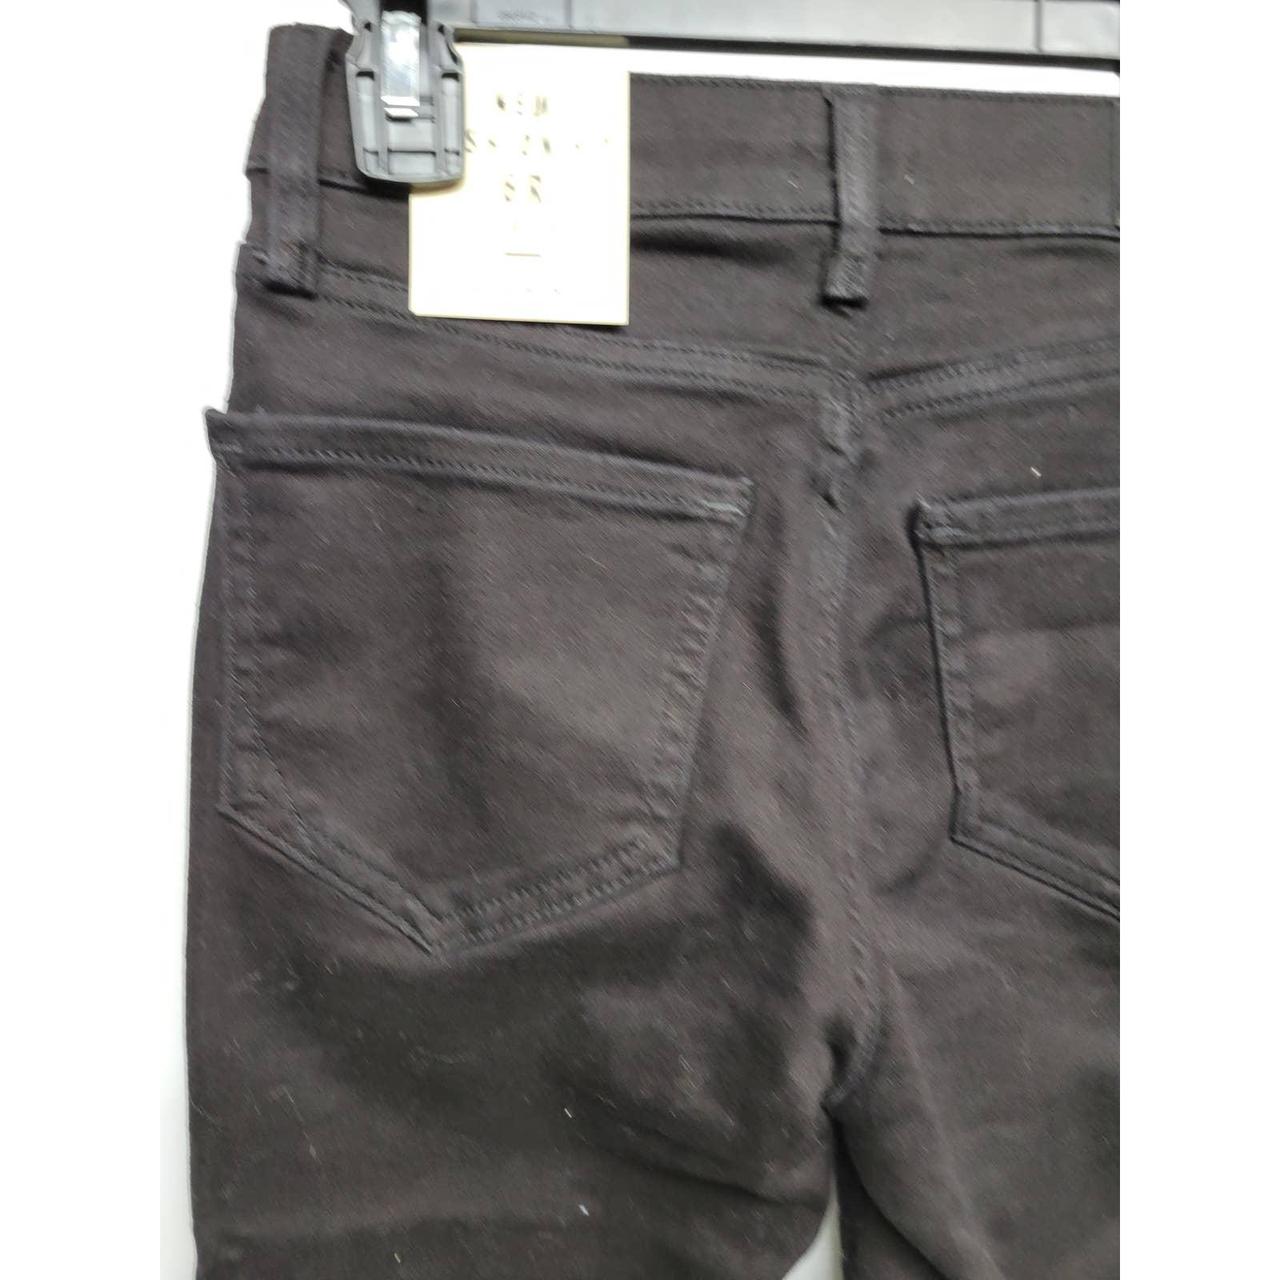 Product Image 4 - BLACK MID RISE FLARED JEANS
River